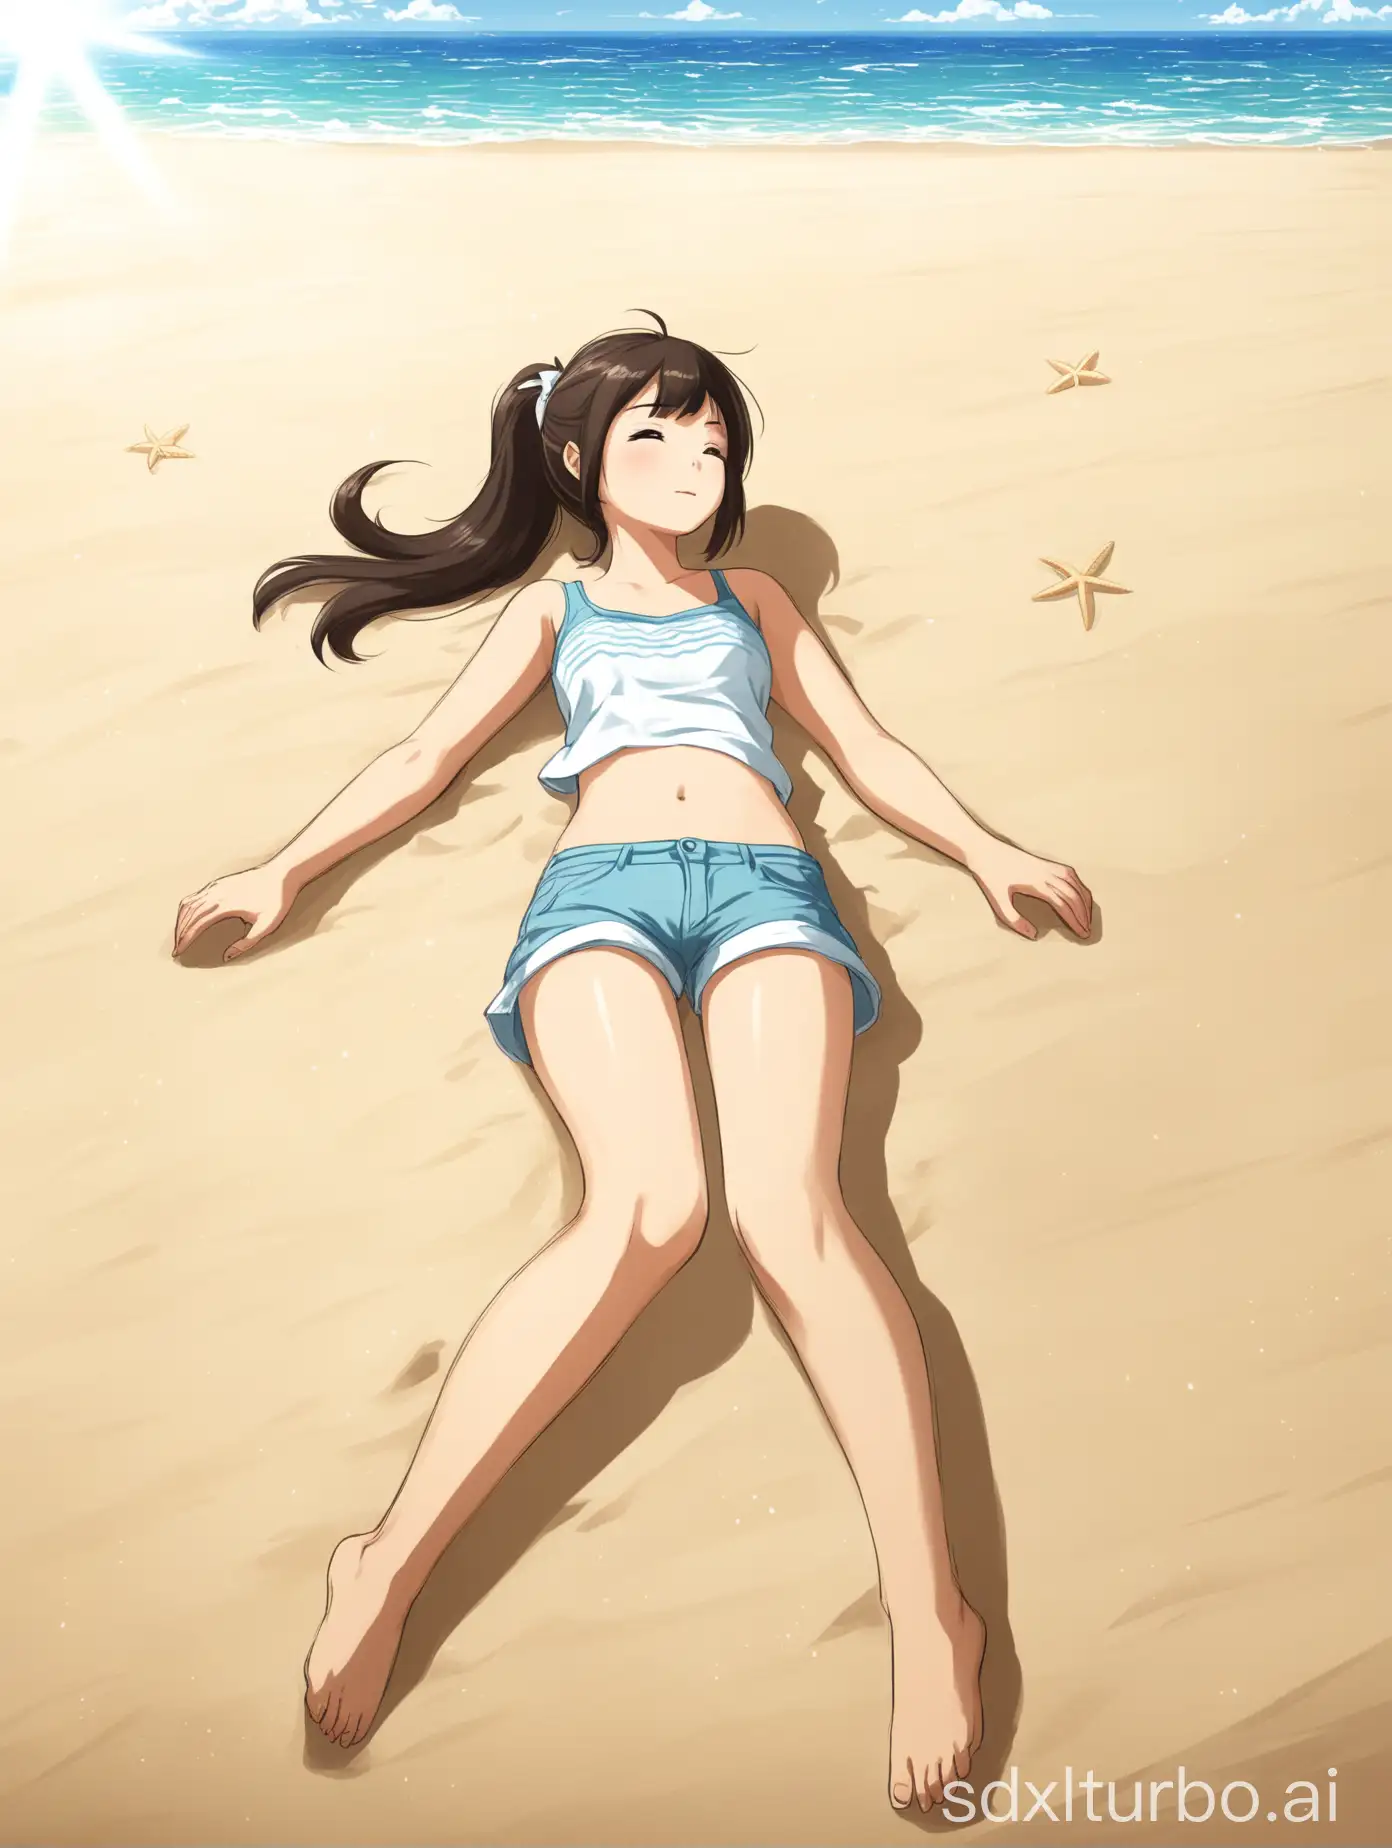 A panoramic view of a young Asian girl lying on the ground at harmony beach, drawn in an animated style, showing the beautiful scenery of a summer beach. The girl is wearing light clothing consisting of a short top and shorts, lying on soft sand, with her legs raised, leisurely and comfortably enjoying the sunlight and sea breeze. She has her hair in a ponytail that flutters in the wind, looking very comfortable.